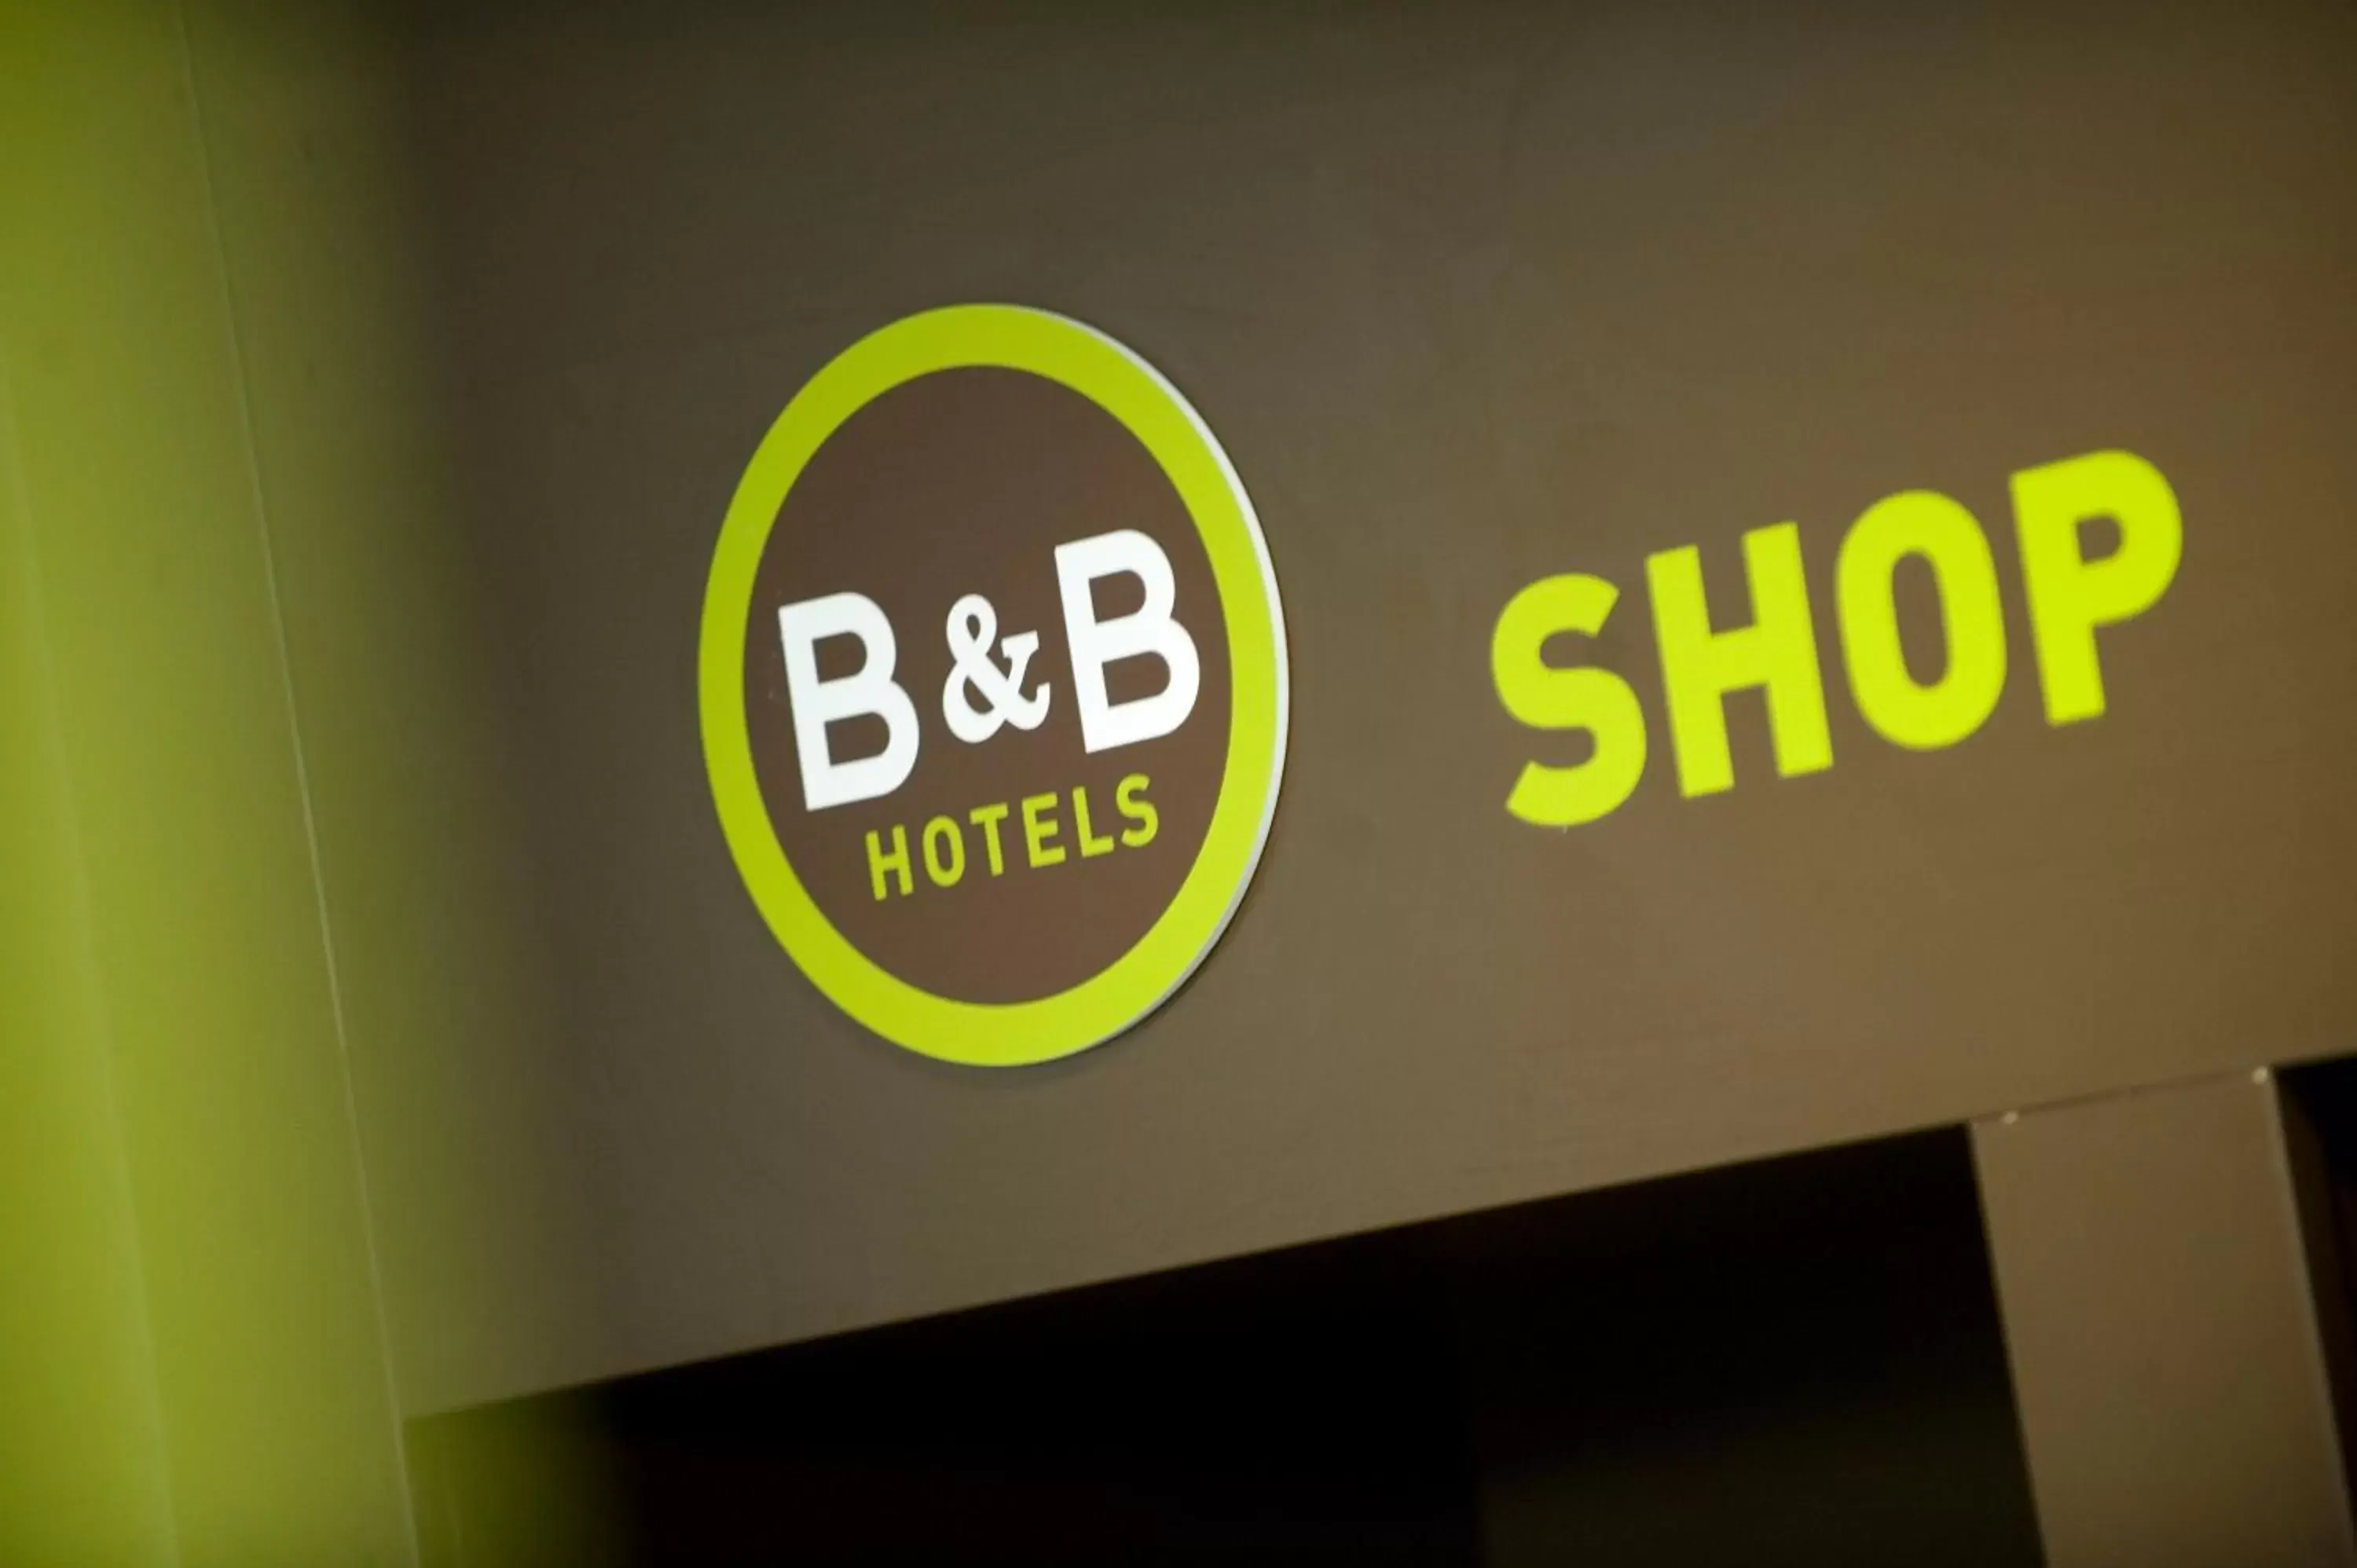 Food and drinks, Logo/Certificate/Sign/Award in B&B HOTEL Saint-Quentin